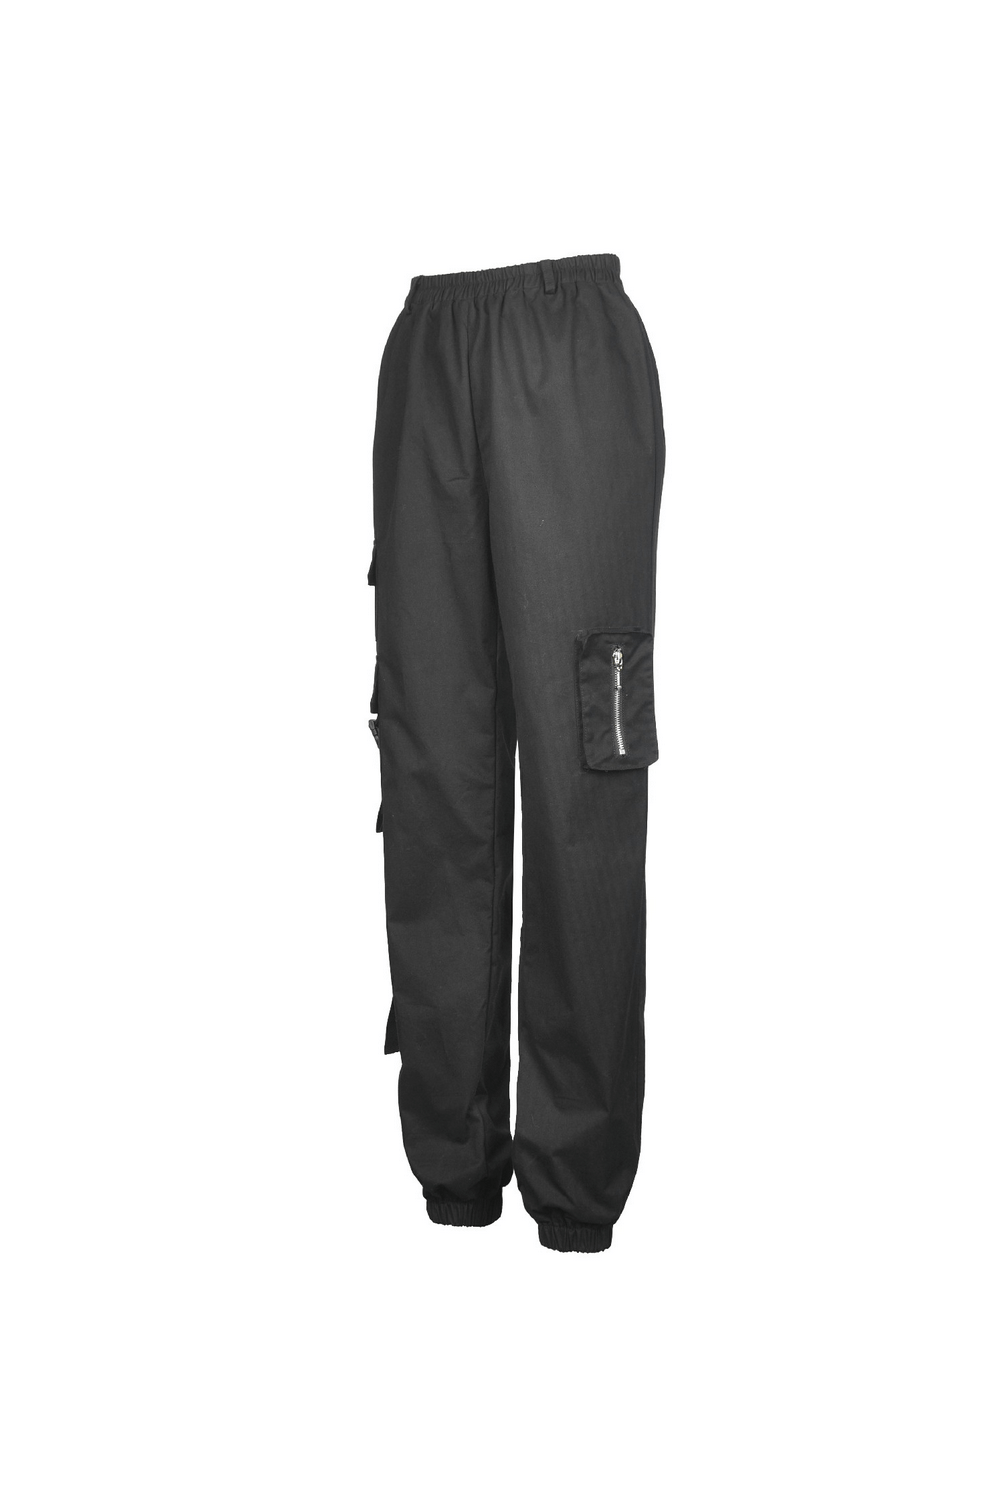 Urban-Style Black Cargo Pants with Spacious Pockets